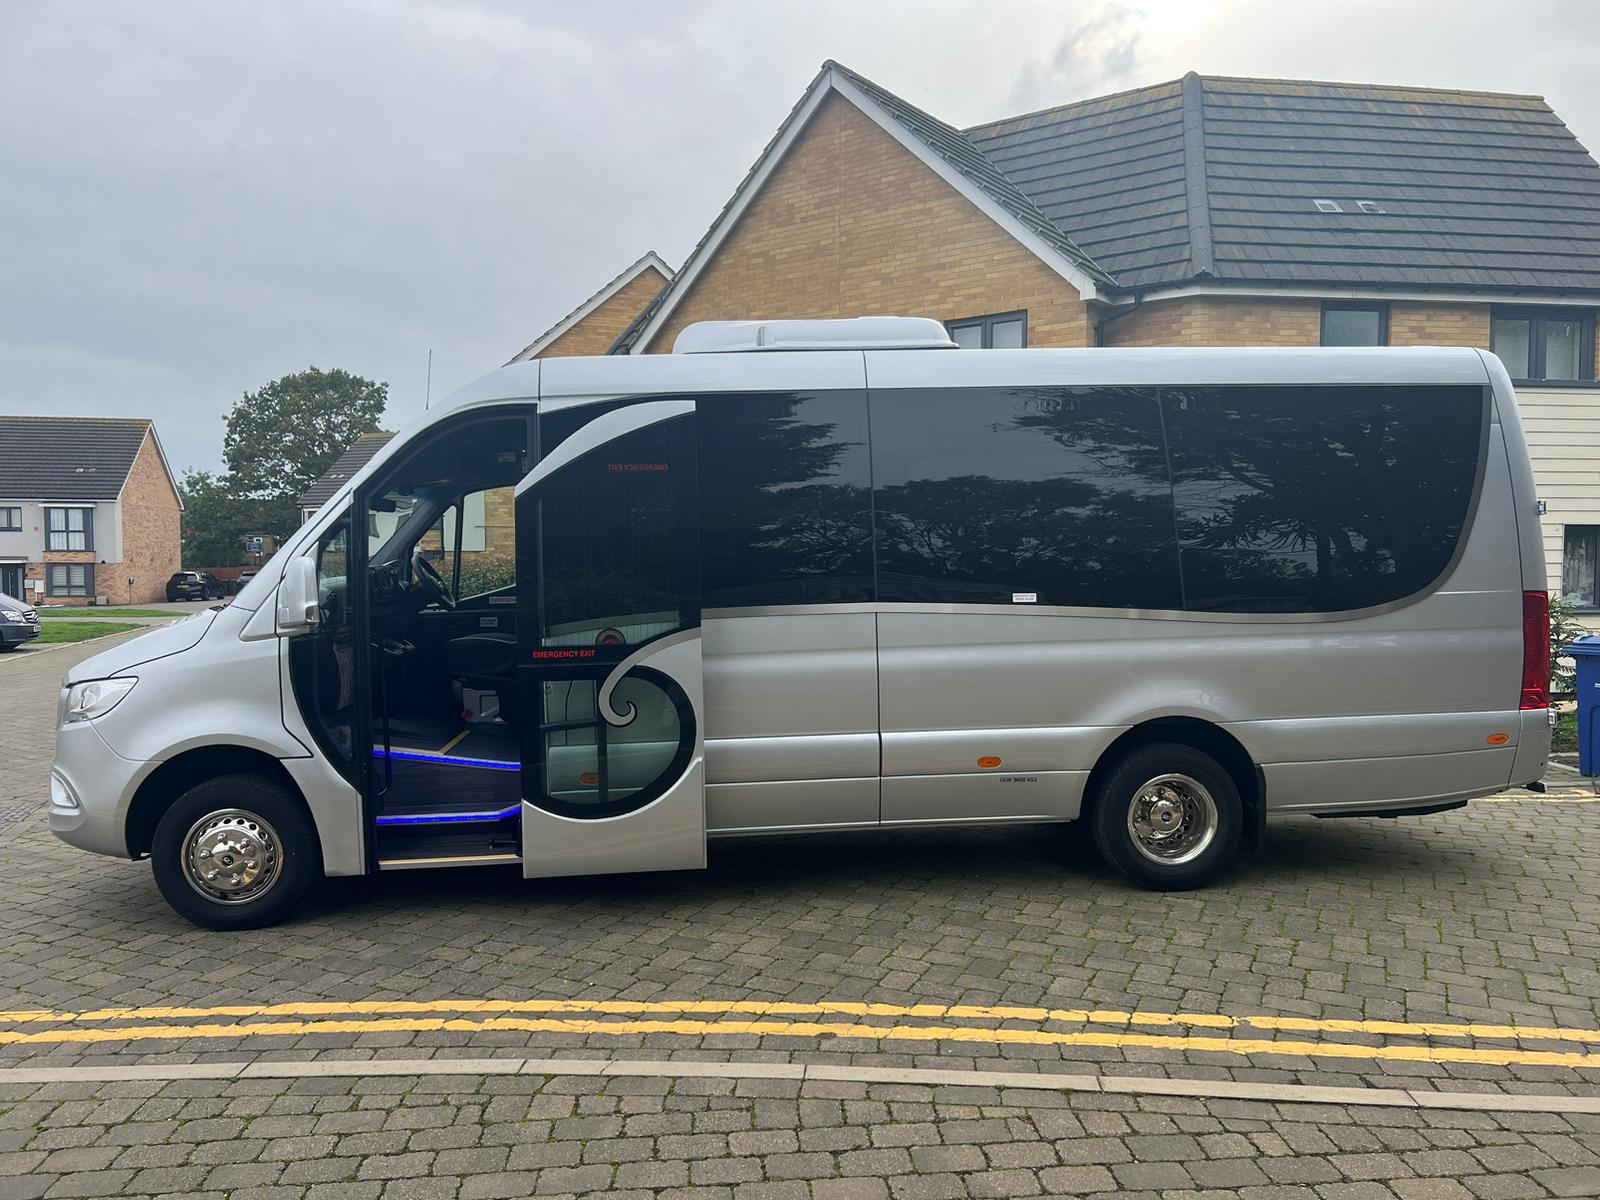 Exploring Leicestershire: The Benefits of Minibus Hire for Group Travel